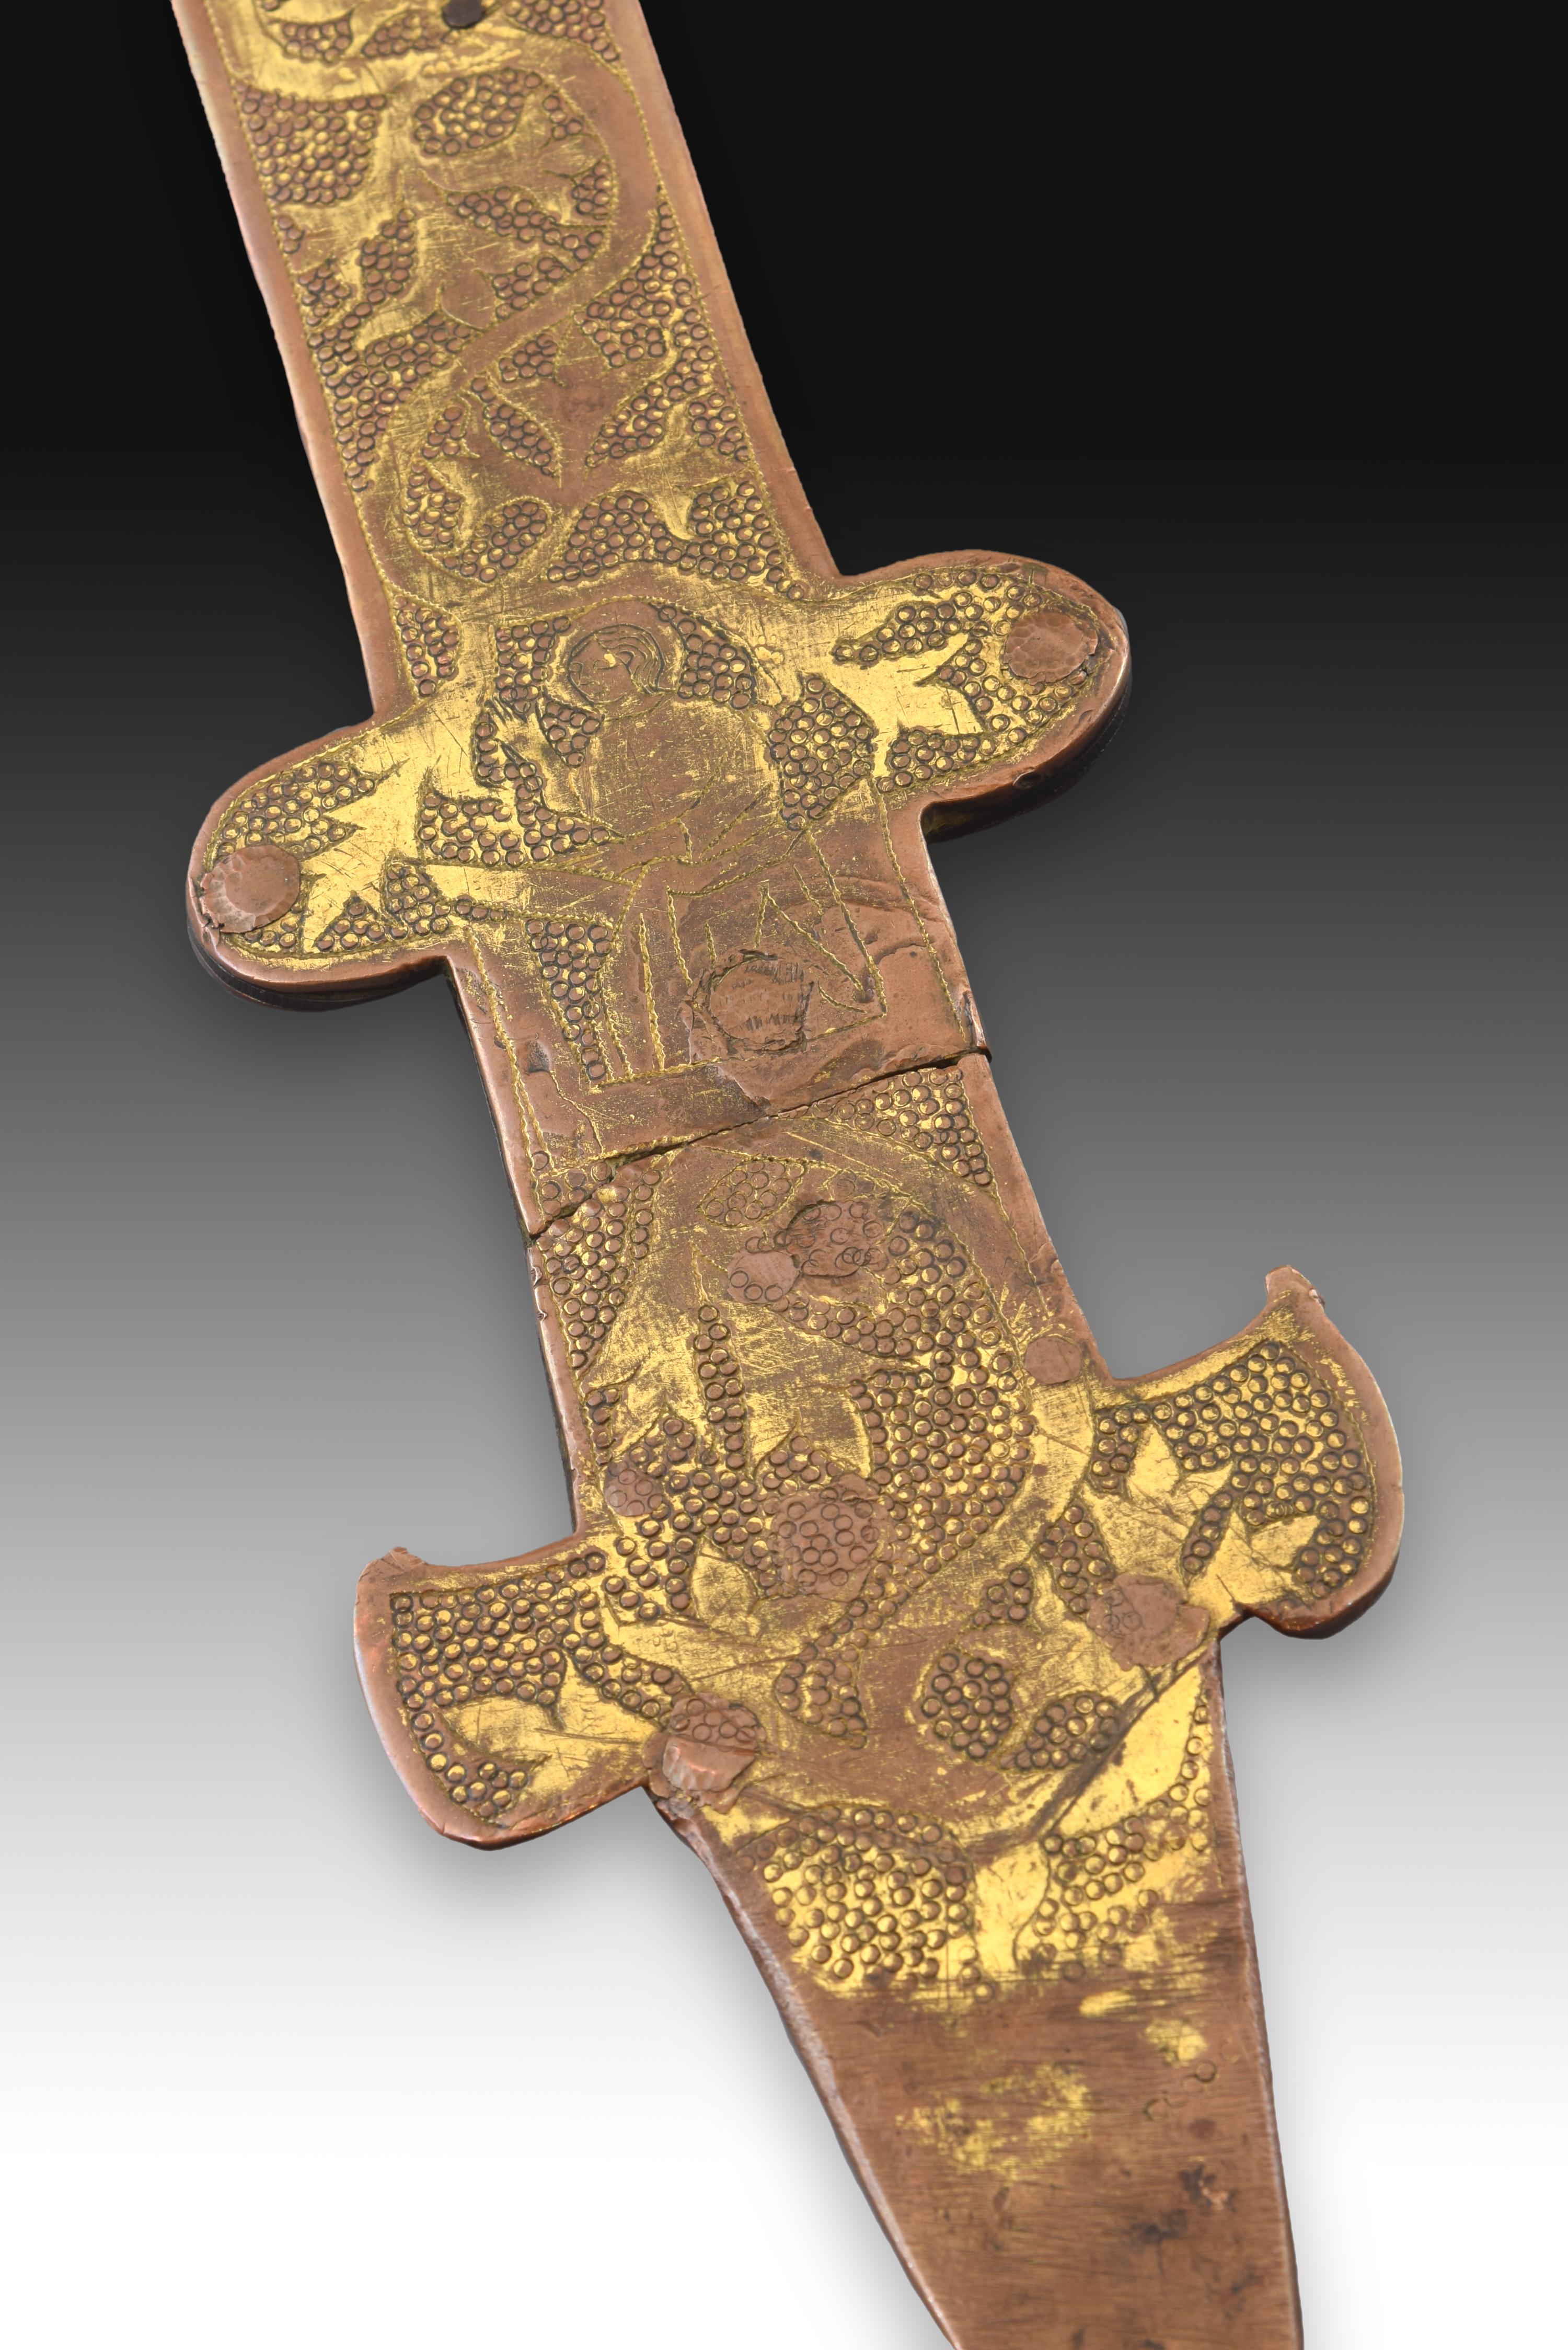 Processional Cross with Christ. Copper, Enamel. Limoges, France 3